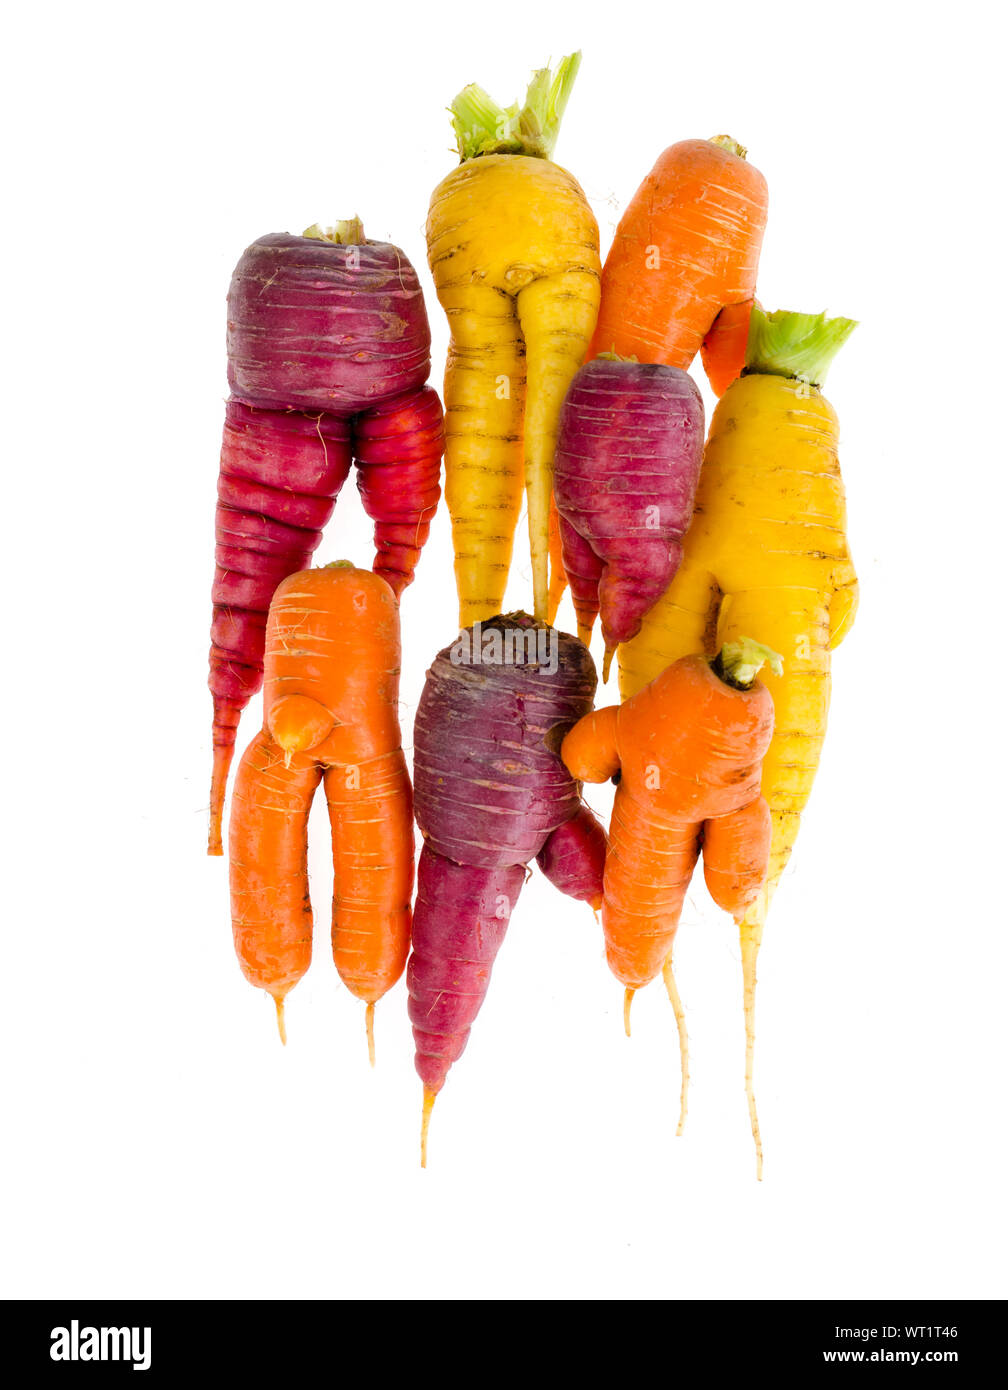 Ugly, deformed fresh organic carrots different color. Studio Photo Stock Photo